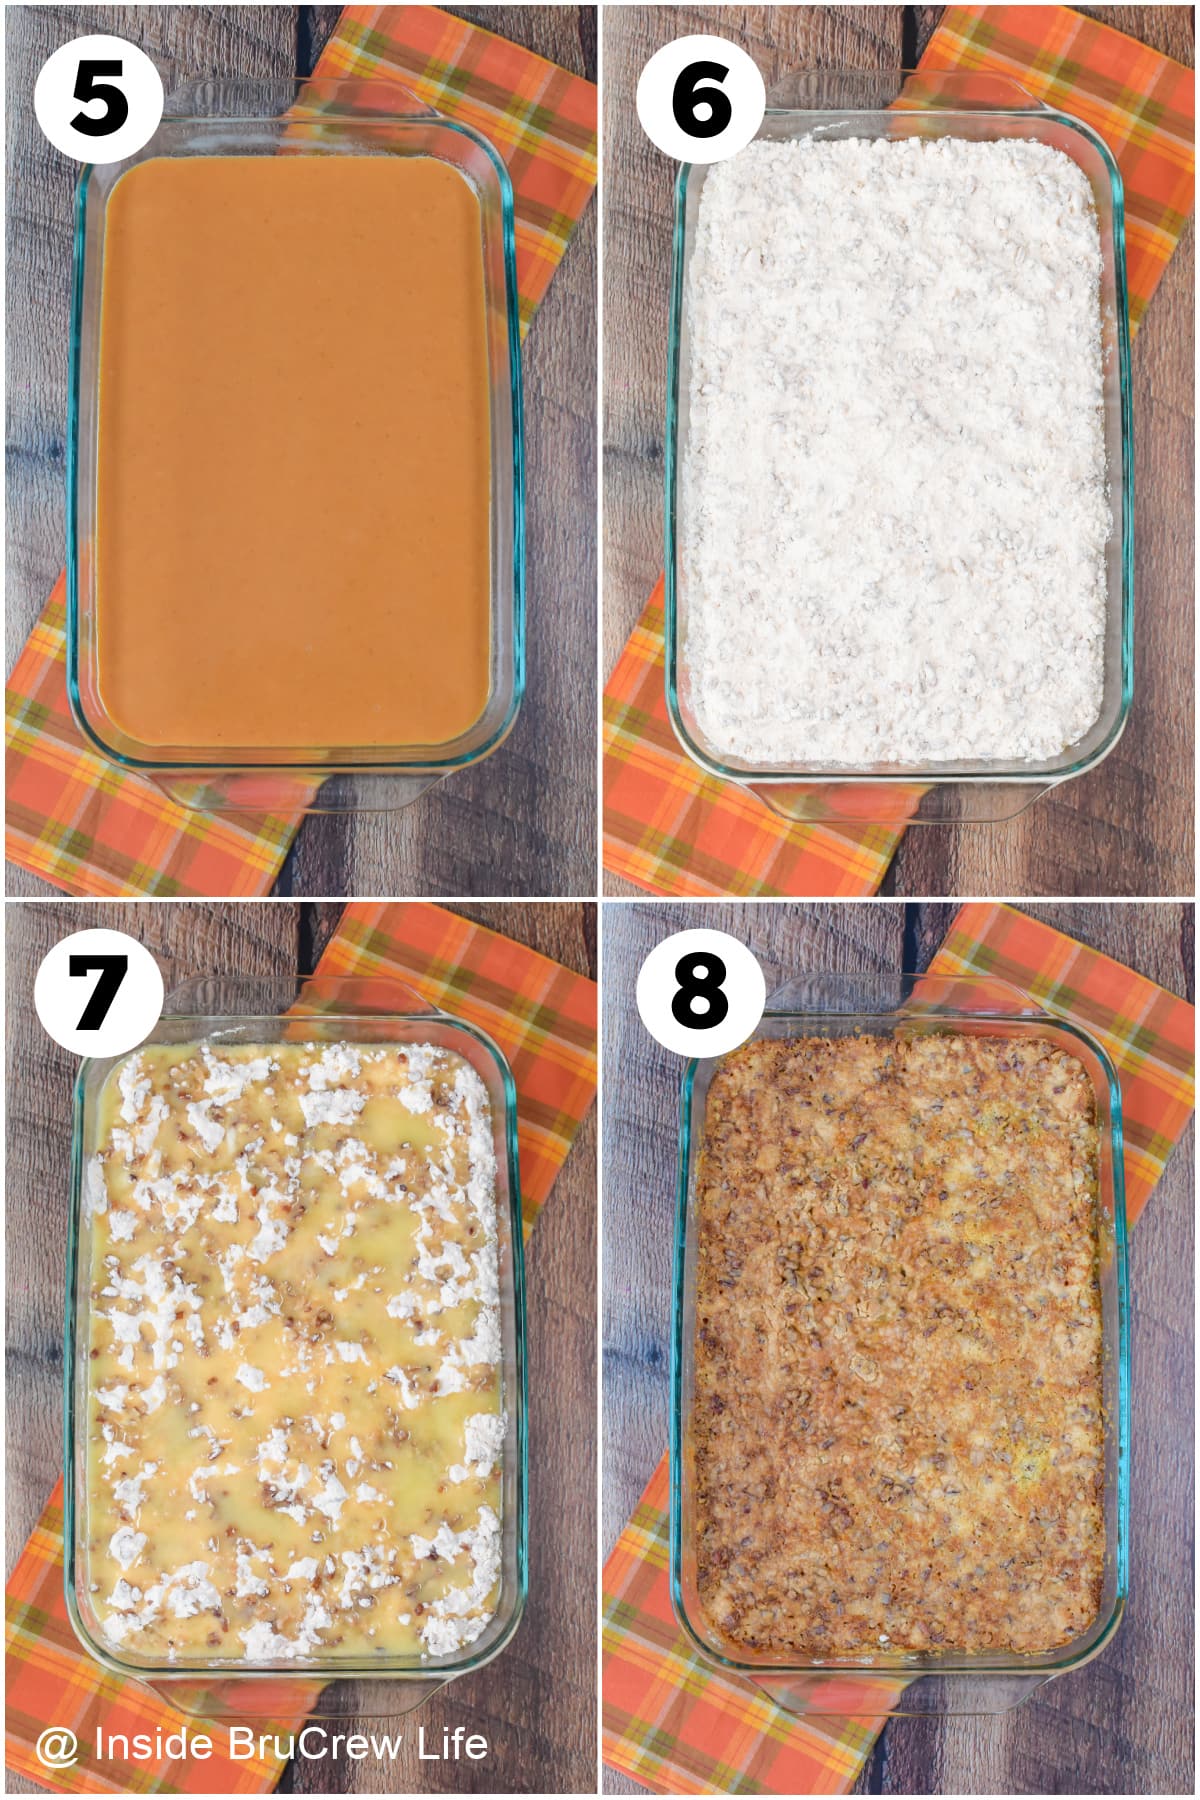 Four pictures showing the steps to baking a pumpkin cobbler.